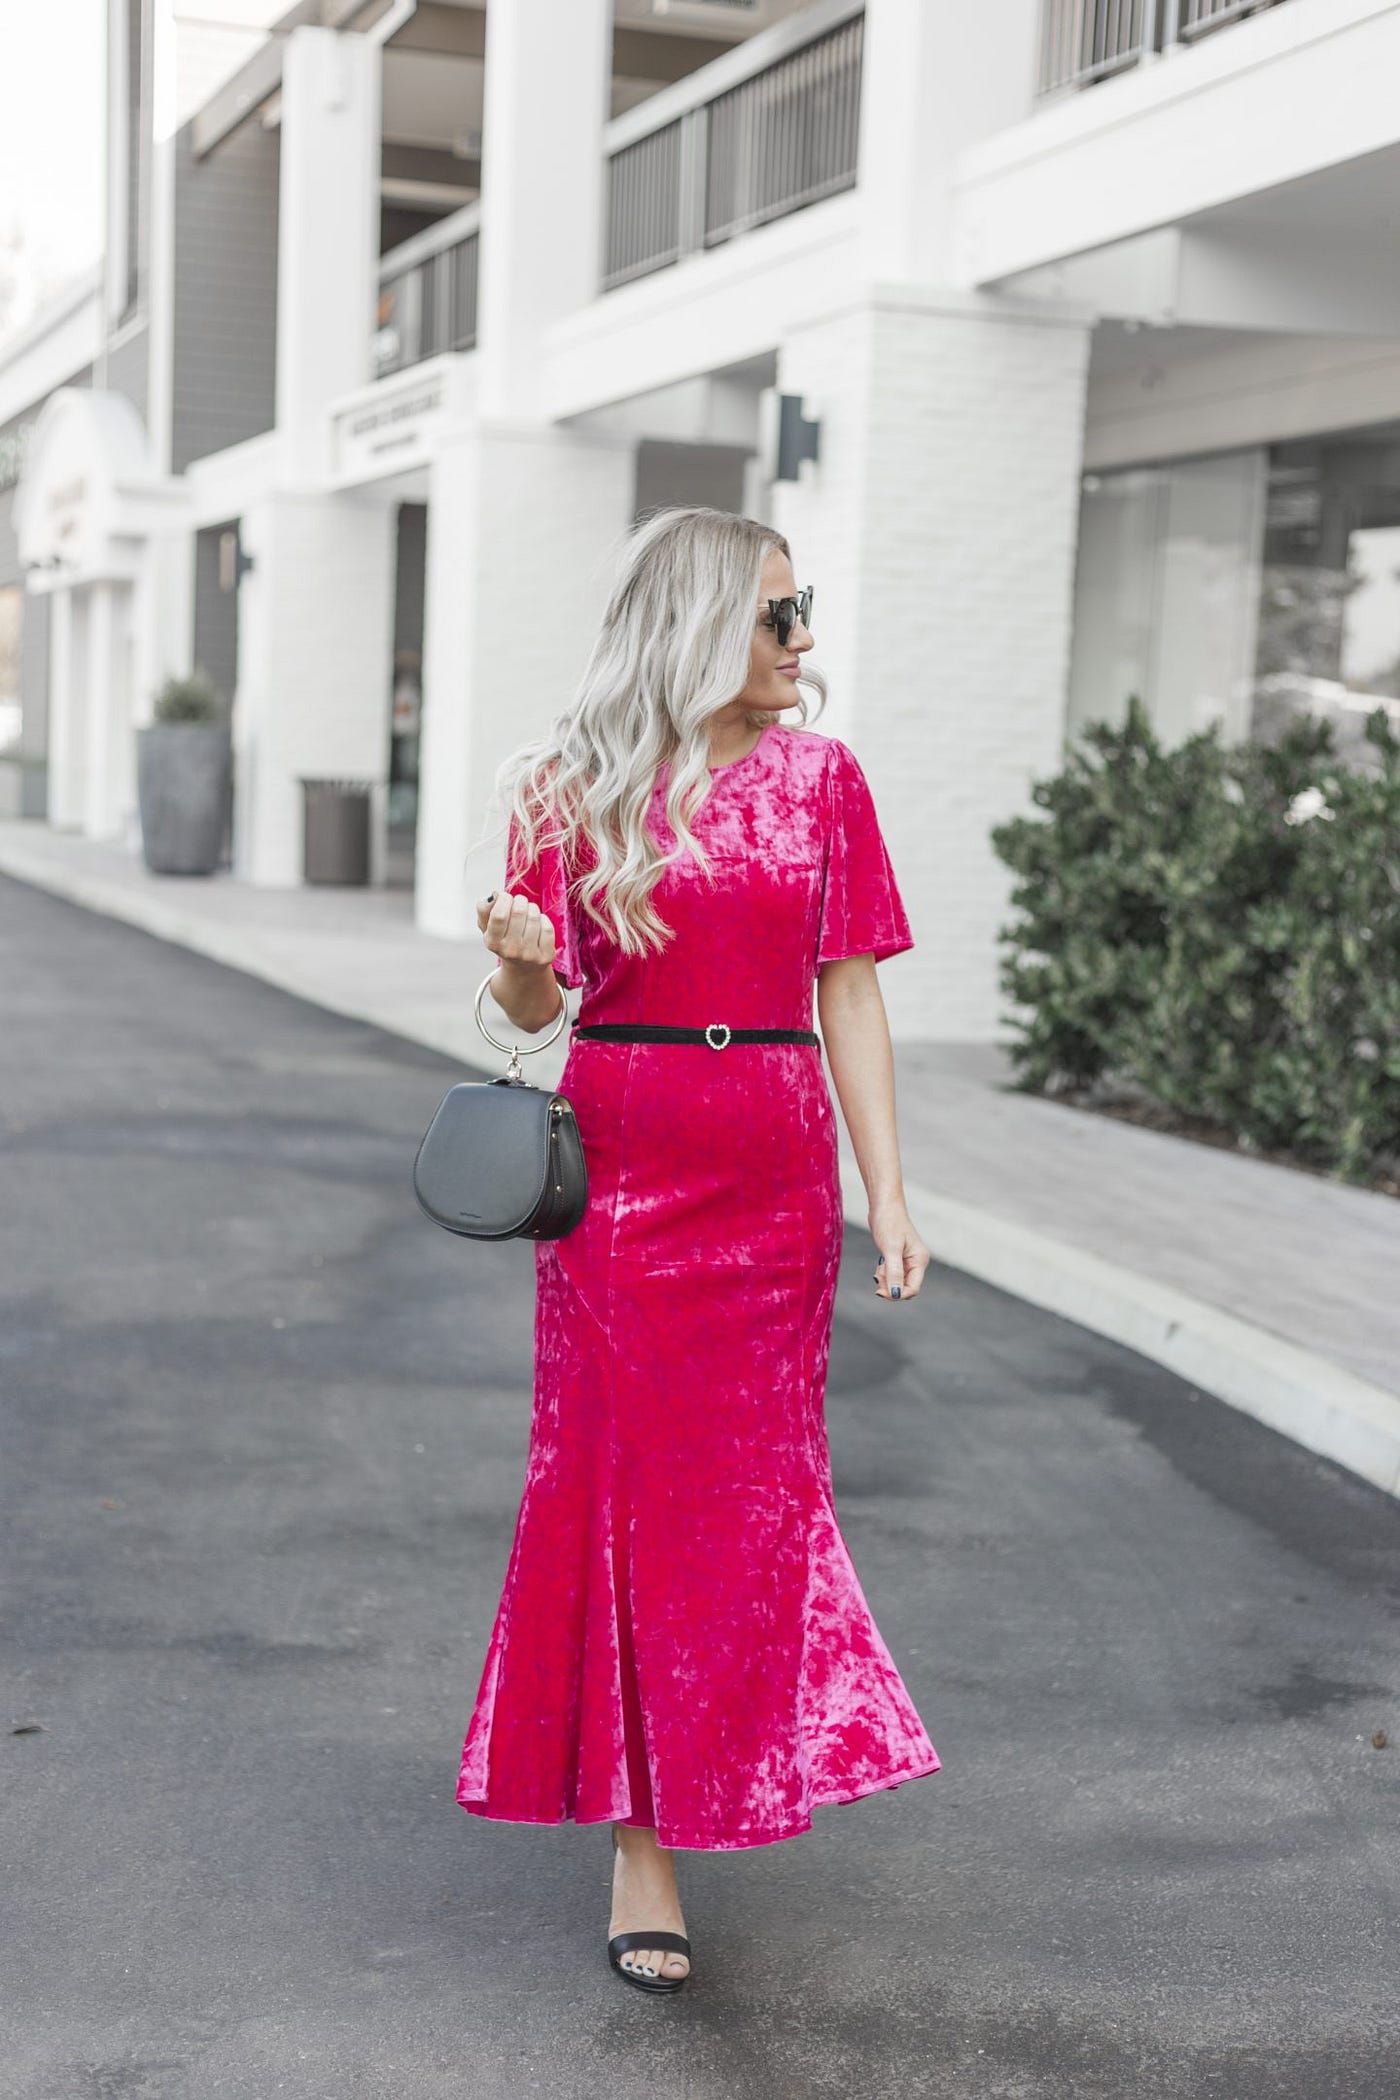 Pink midi dress and how to style it for the holiday season